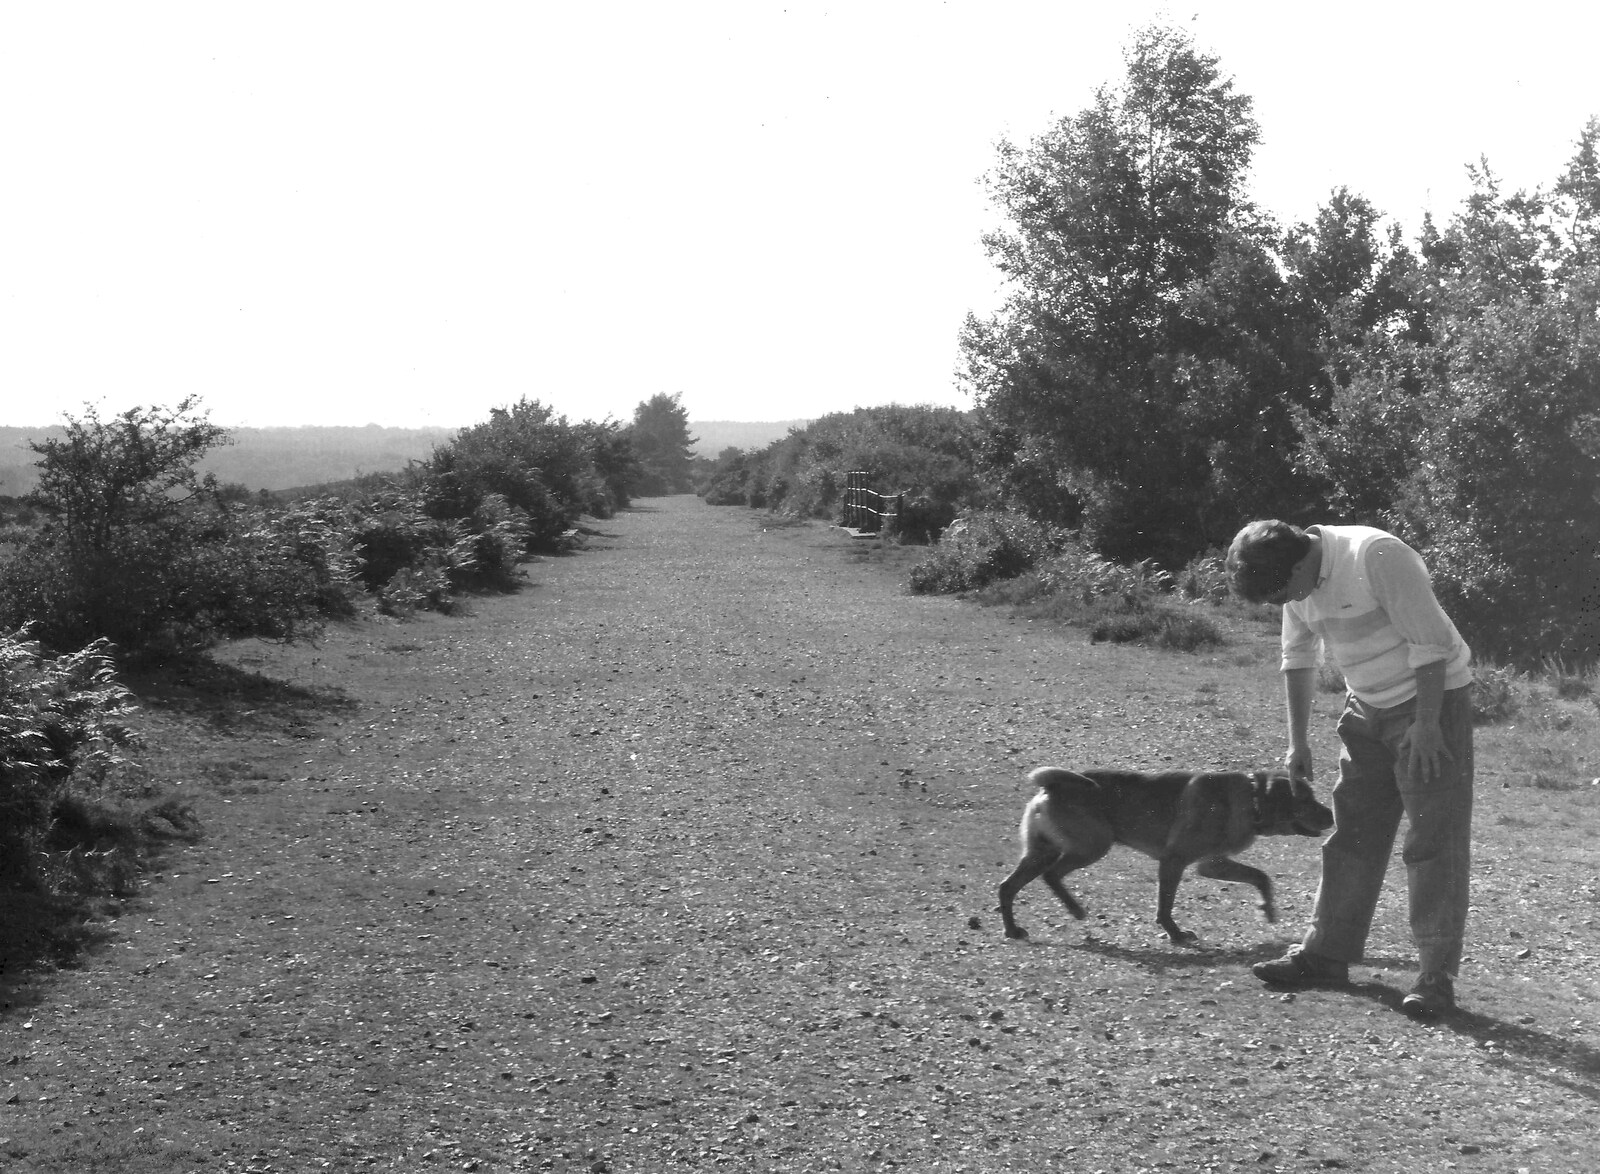 Geordie and Hamish on an old railway track in the forest from The New Forest Marathon and Other Randomness, New Milton, Hampshire - 15th September 1985